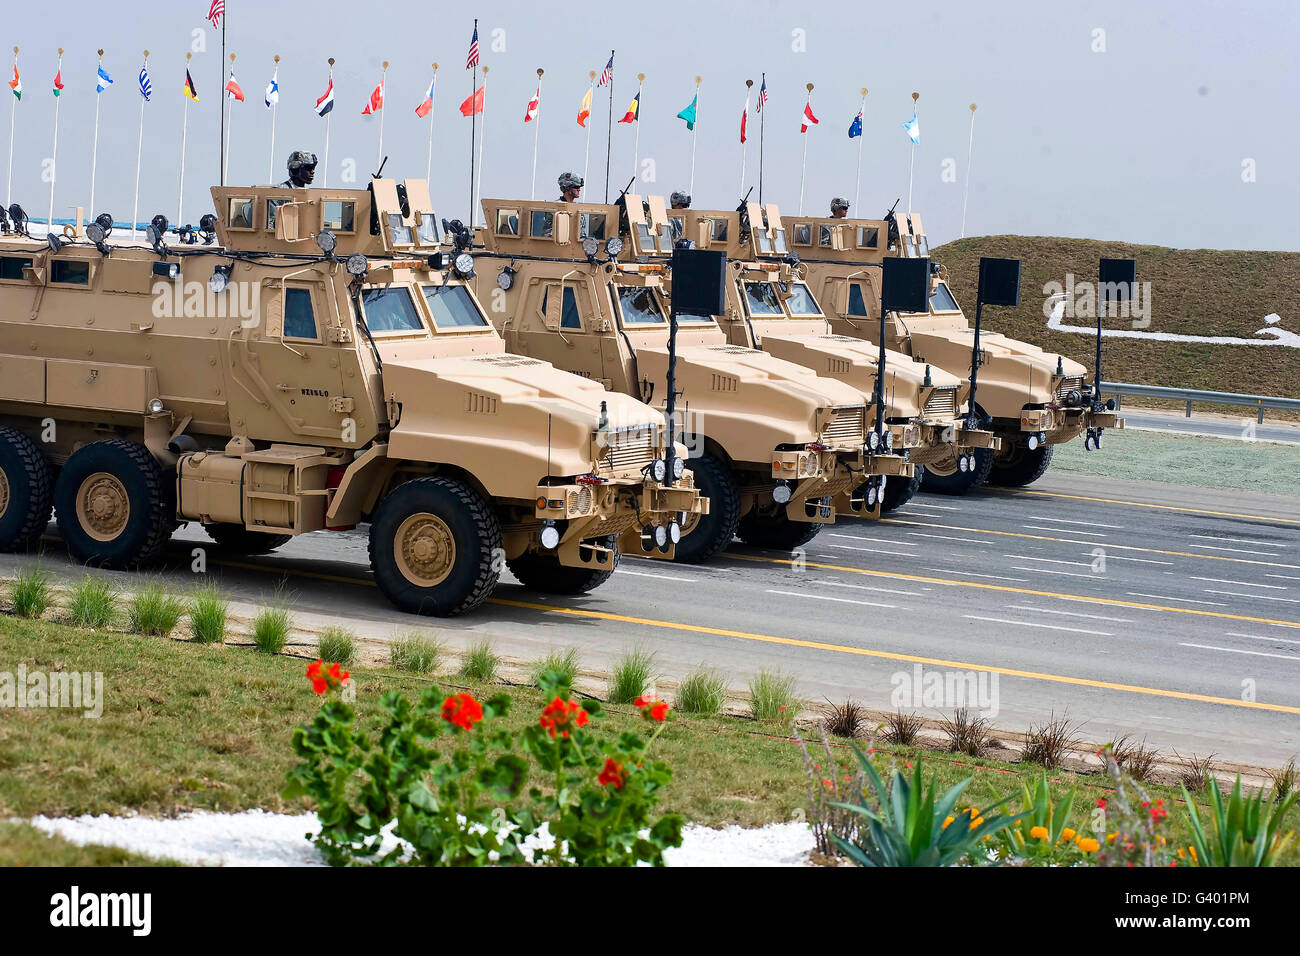 U.S. Army Caiman vehicles take part in the 50/20 Celebration parade in Kuwait. Stock Photo